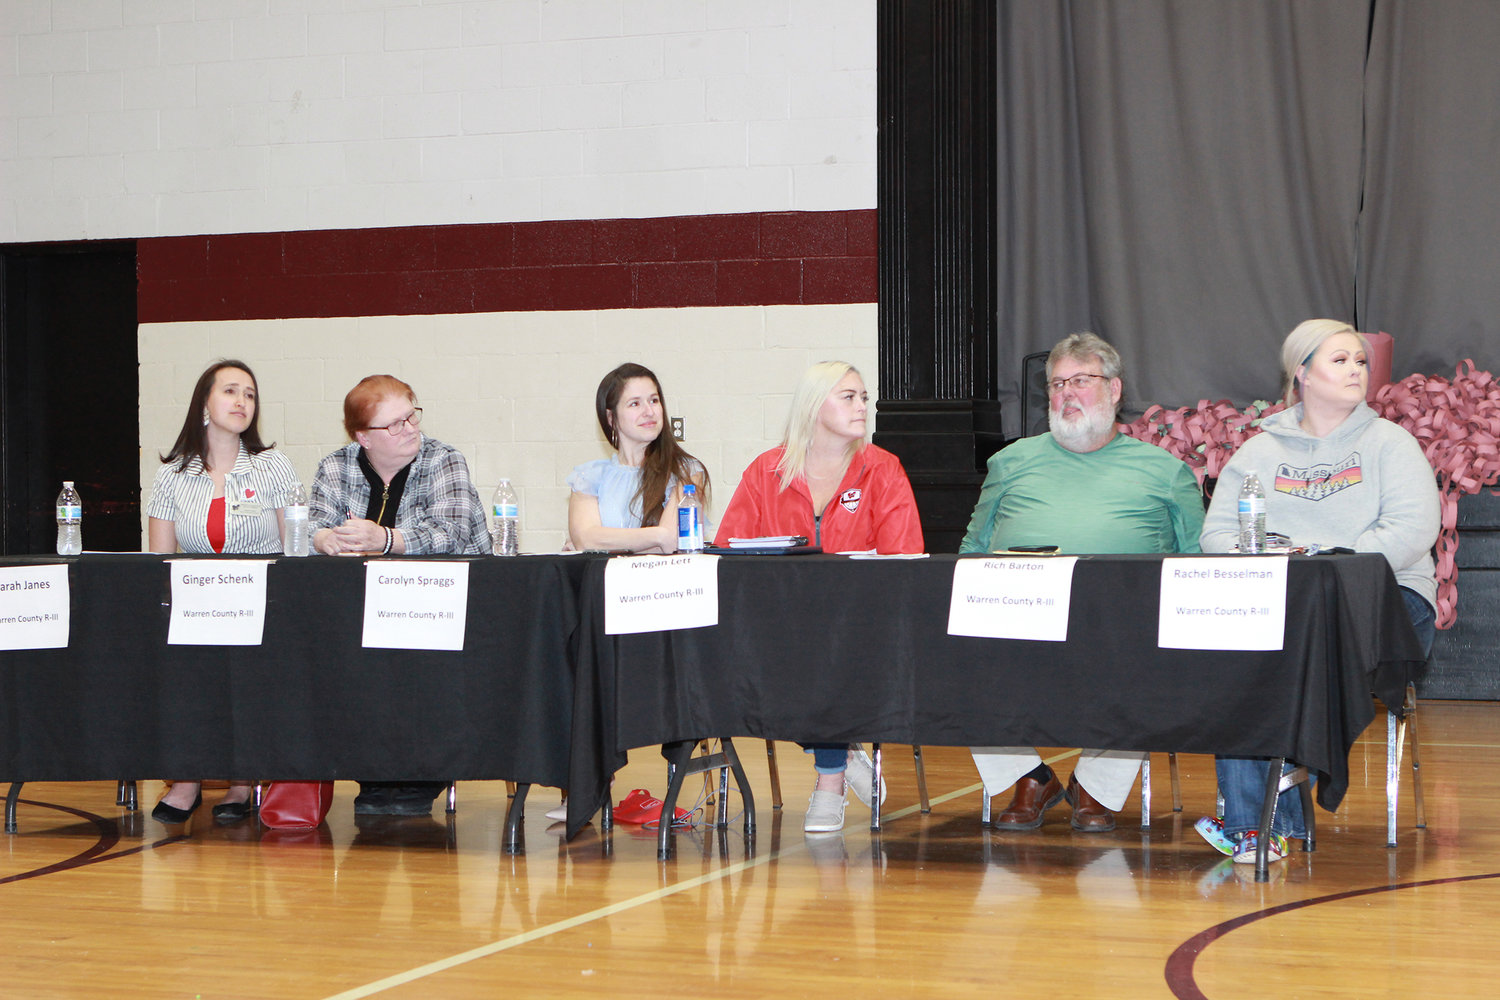 R-III CANDIDATES — Candidates for the Warren County R-III School Board prepare to address a forum hosted at Liberty Christian Academy. Wright City R-II candidates also spoke at the event. Pictured, from left, are Sarah Janes, Ginger Schenk, Carolyn Spraggs, Megan Lett, Rich Barton, and Rachel Besselman. Not in attendance: candidate Sara Marcellino.